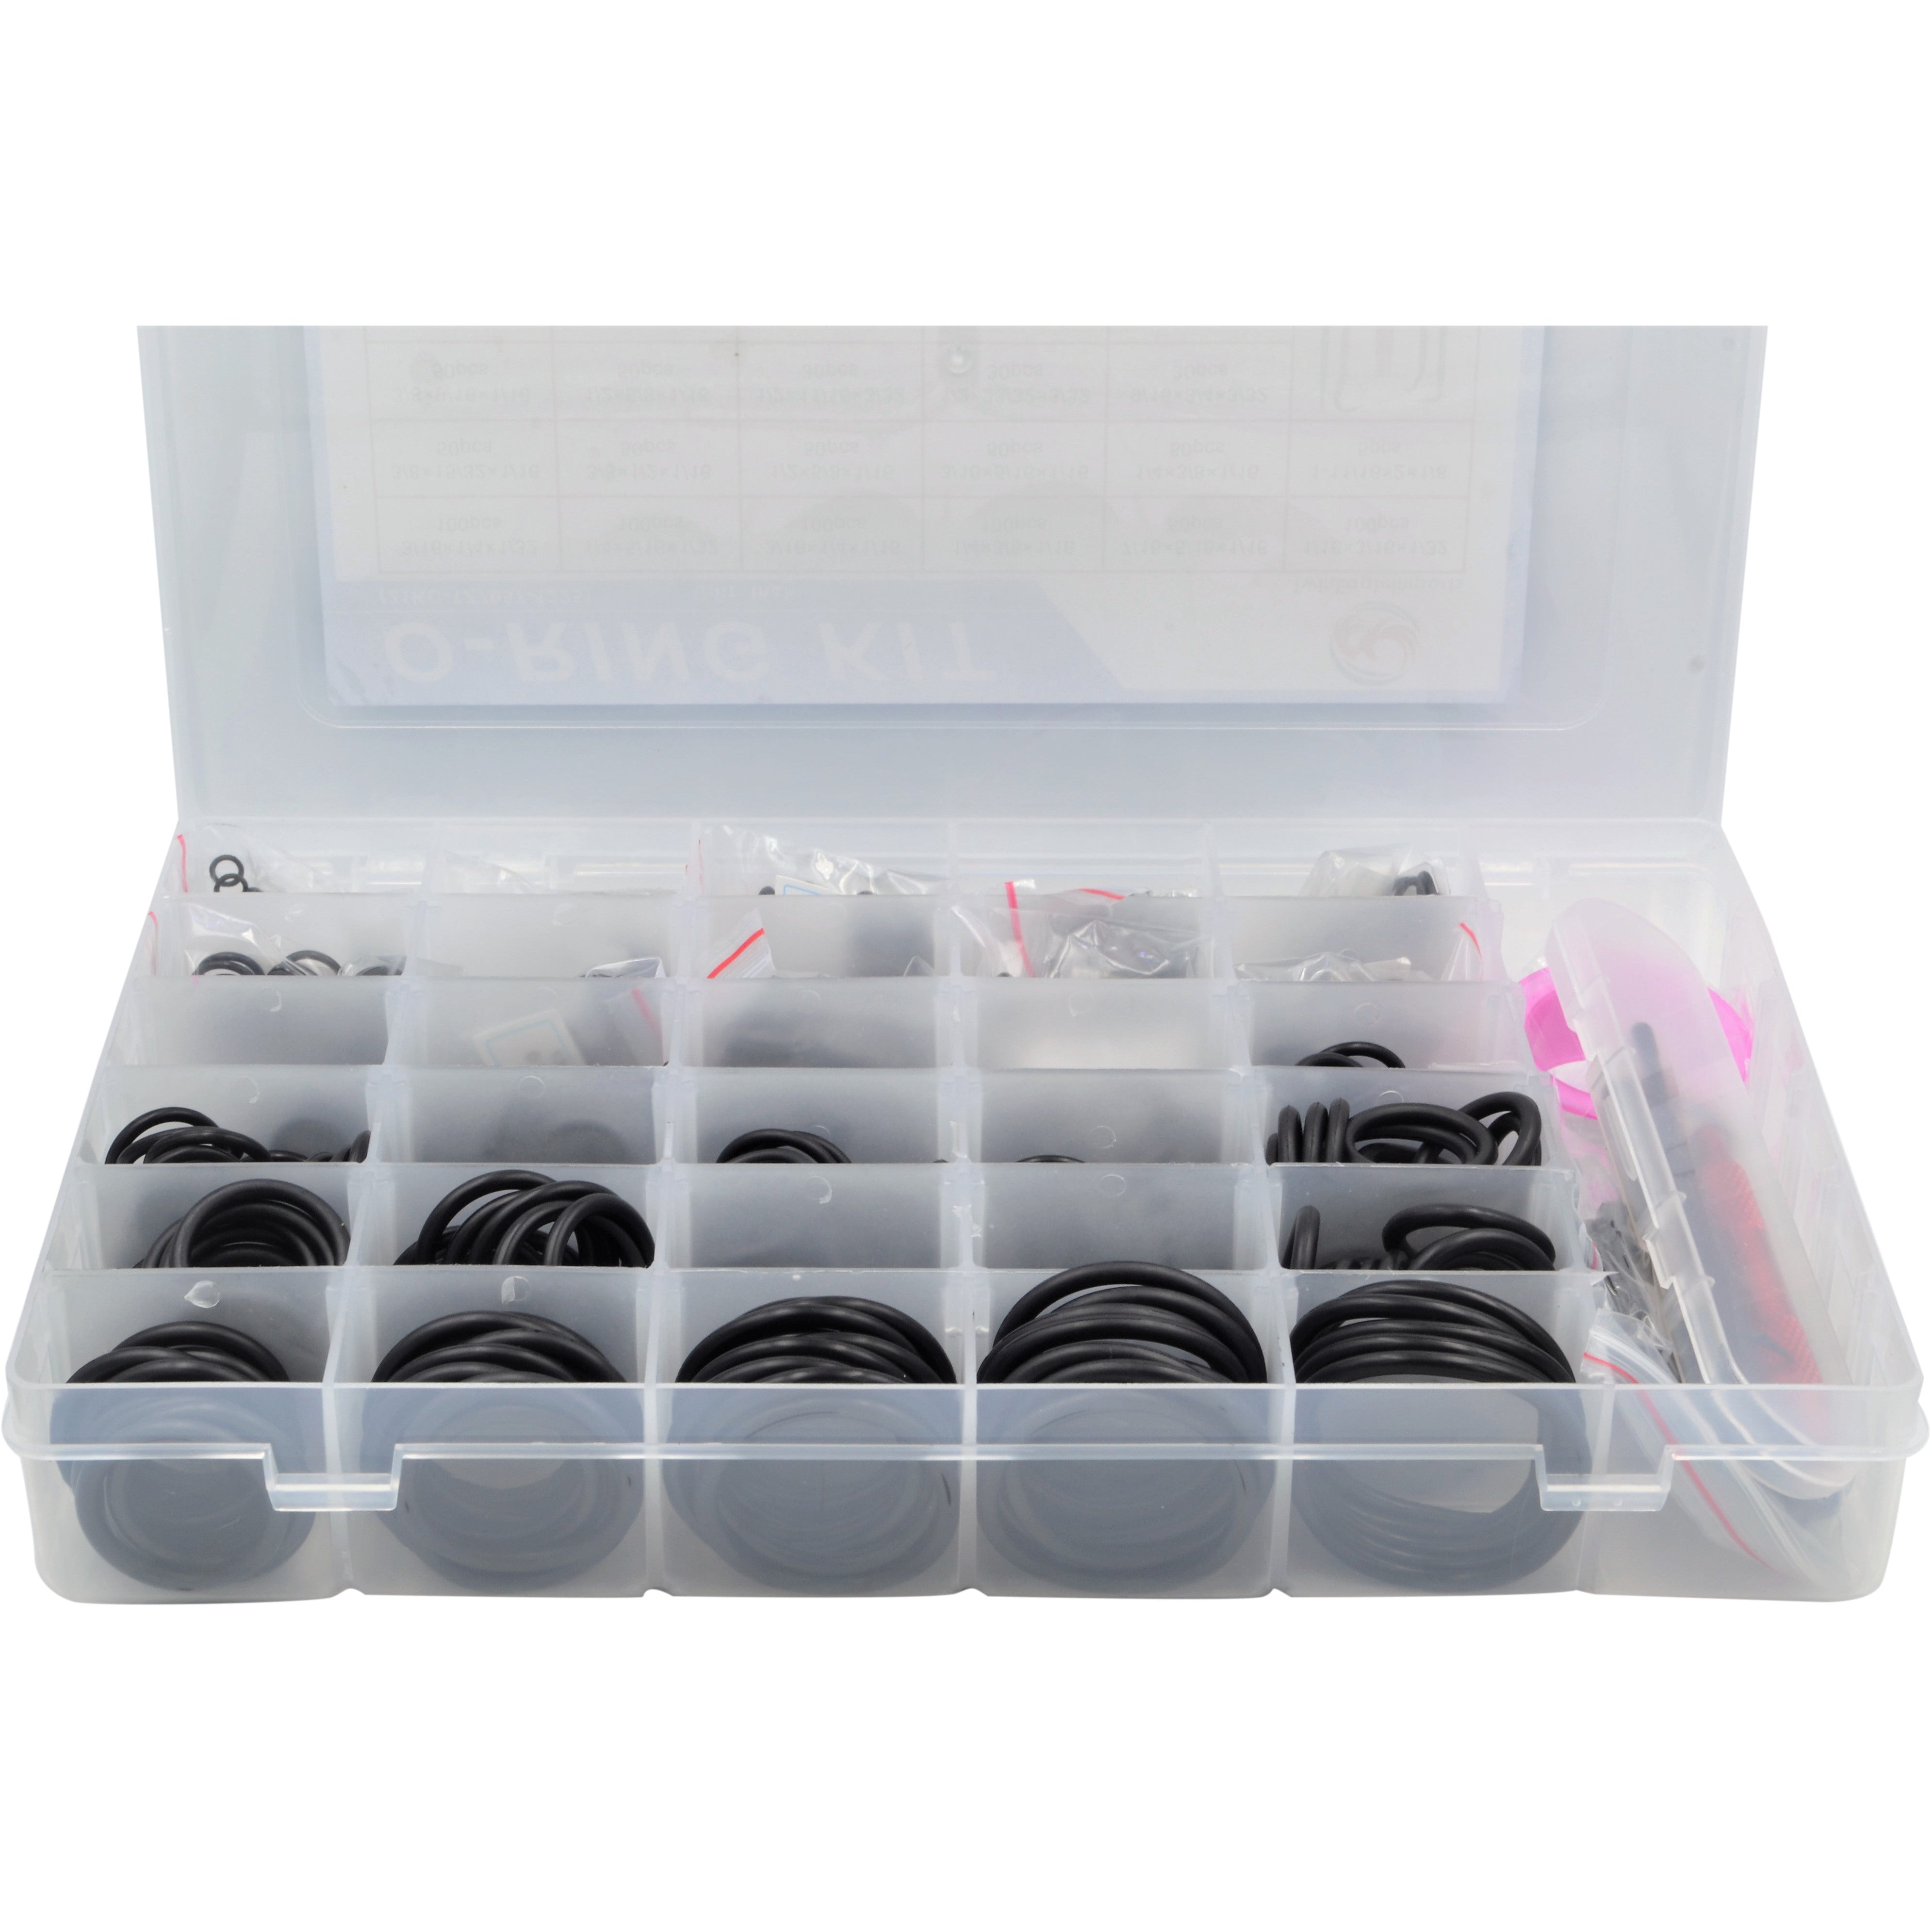 Imperial Nitrile O-Ring 1225 piece Grab Kit Assortment